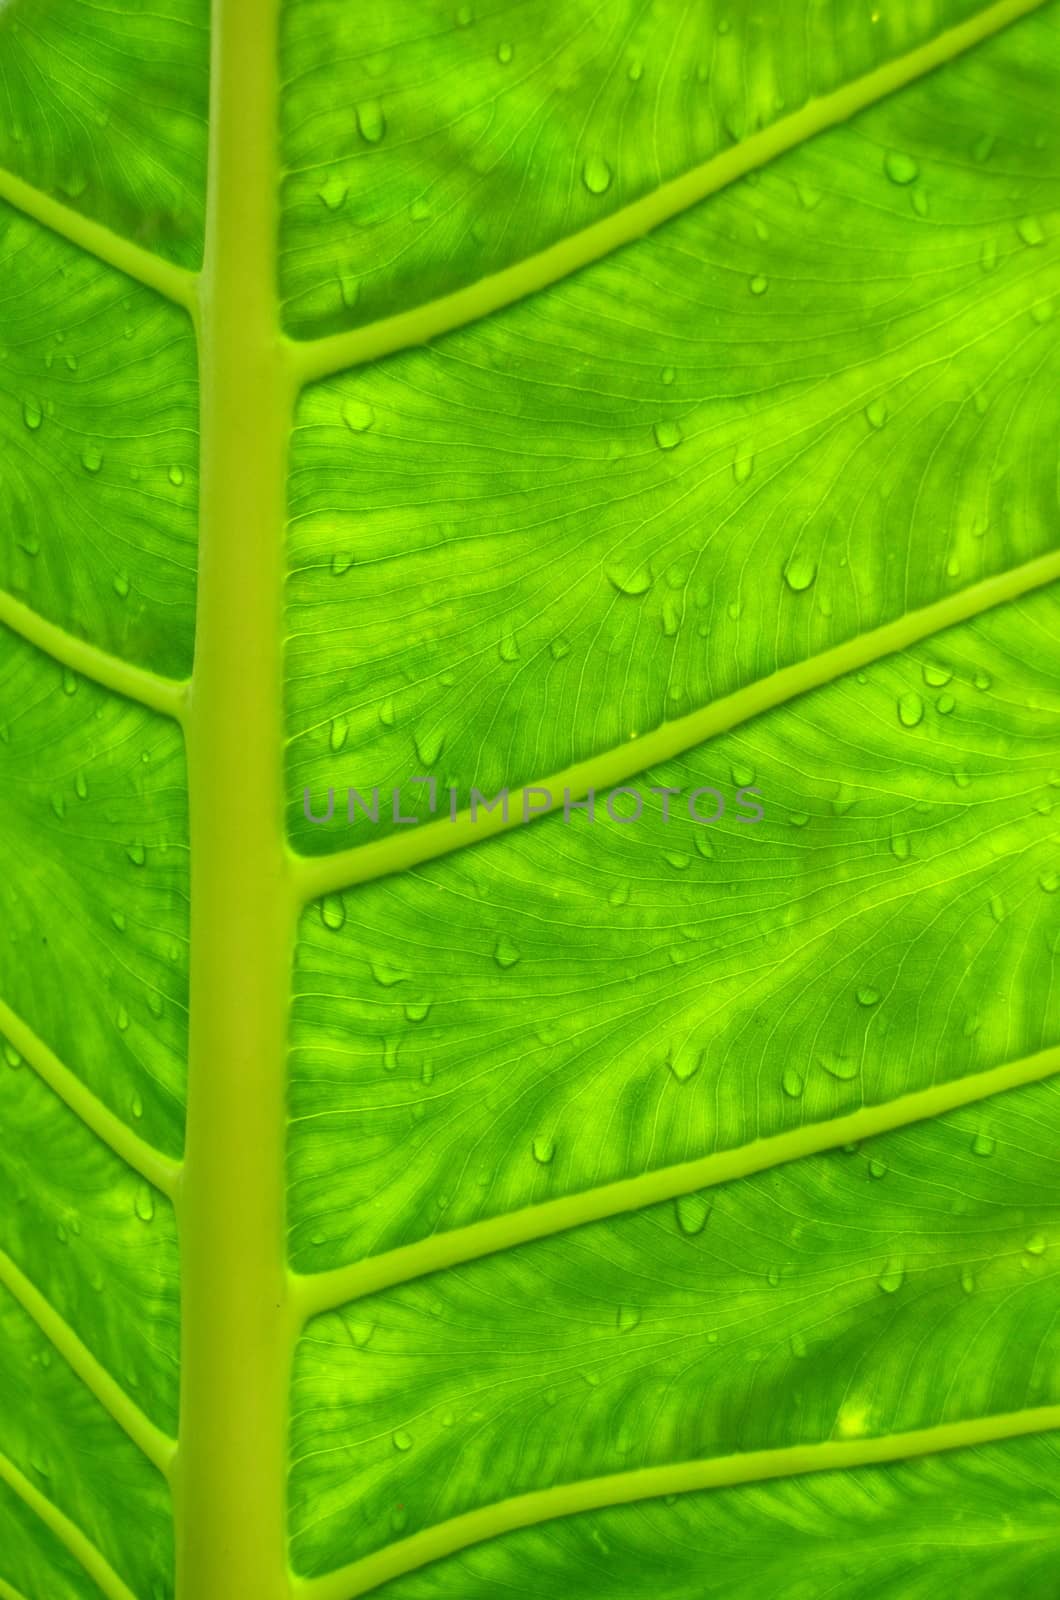 Water Drops On A Leaf In A Tropical Rainforest